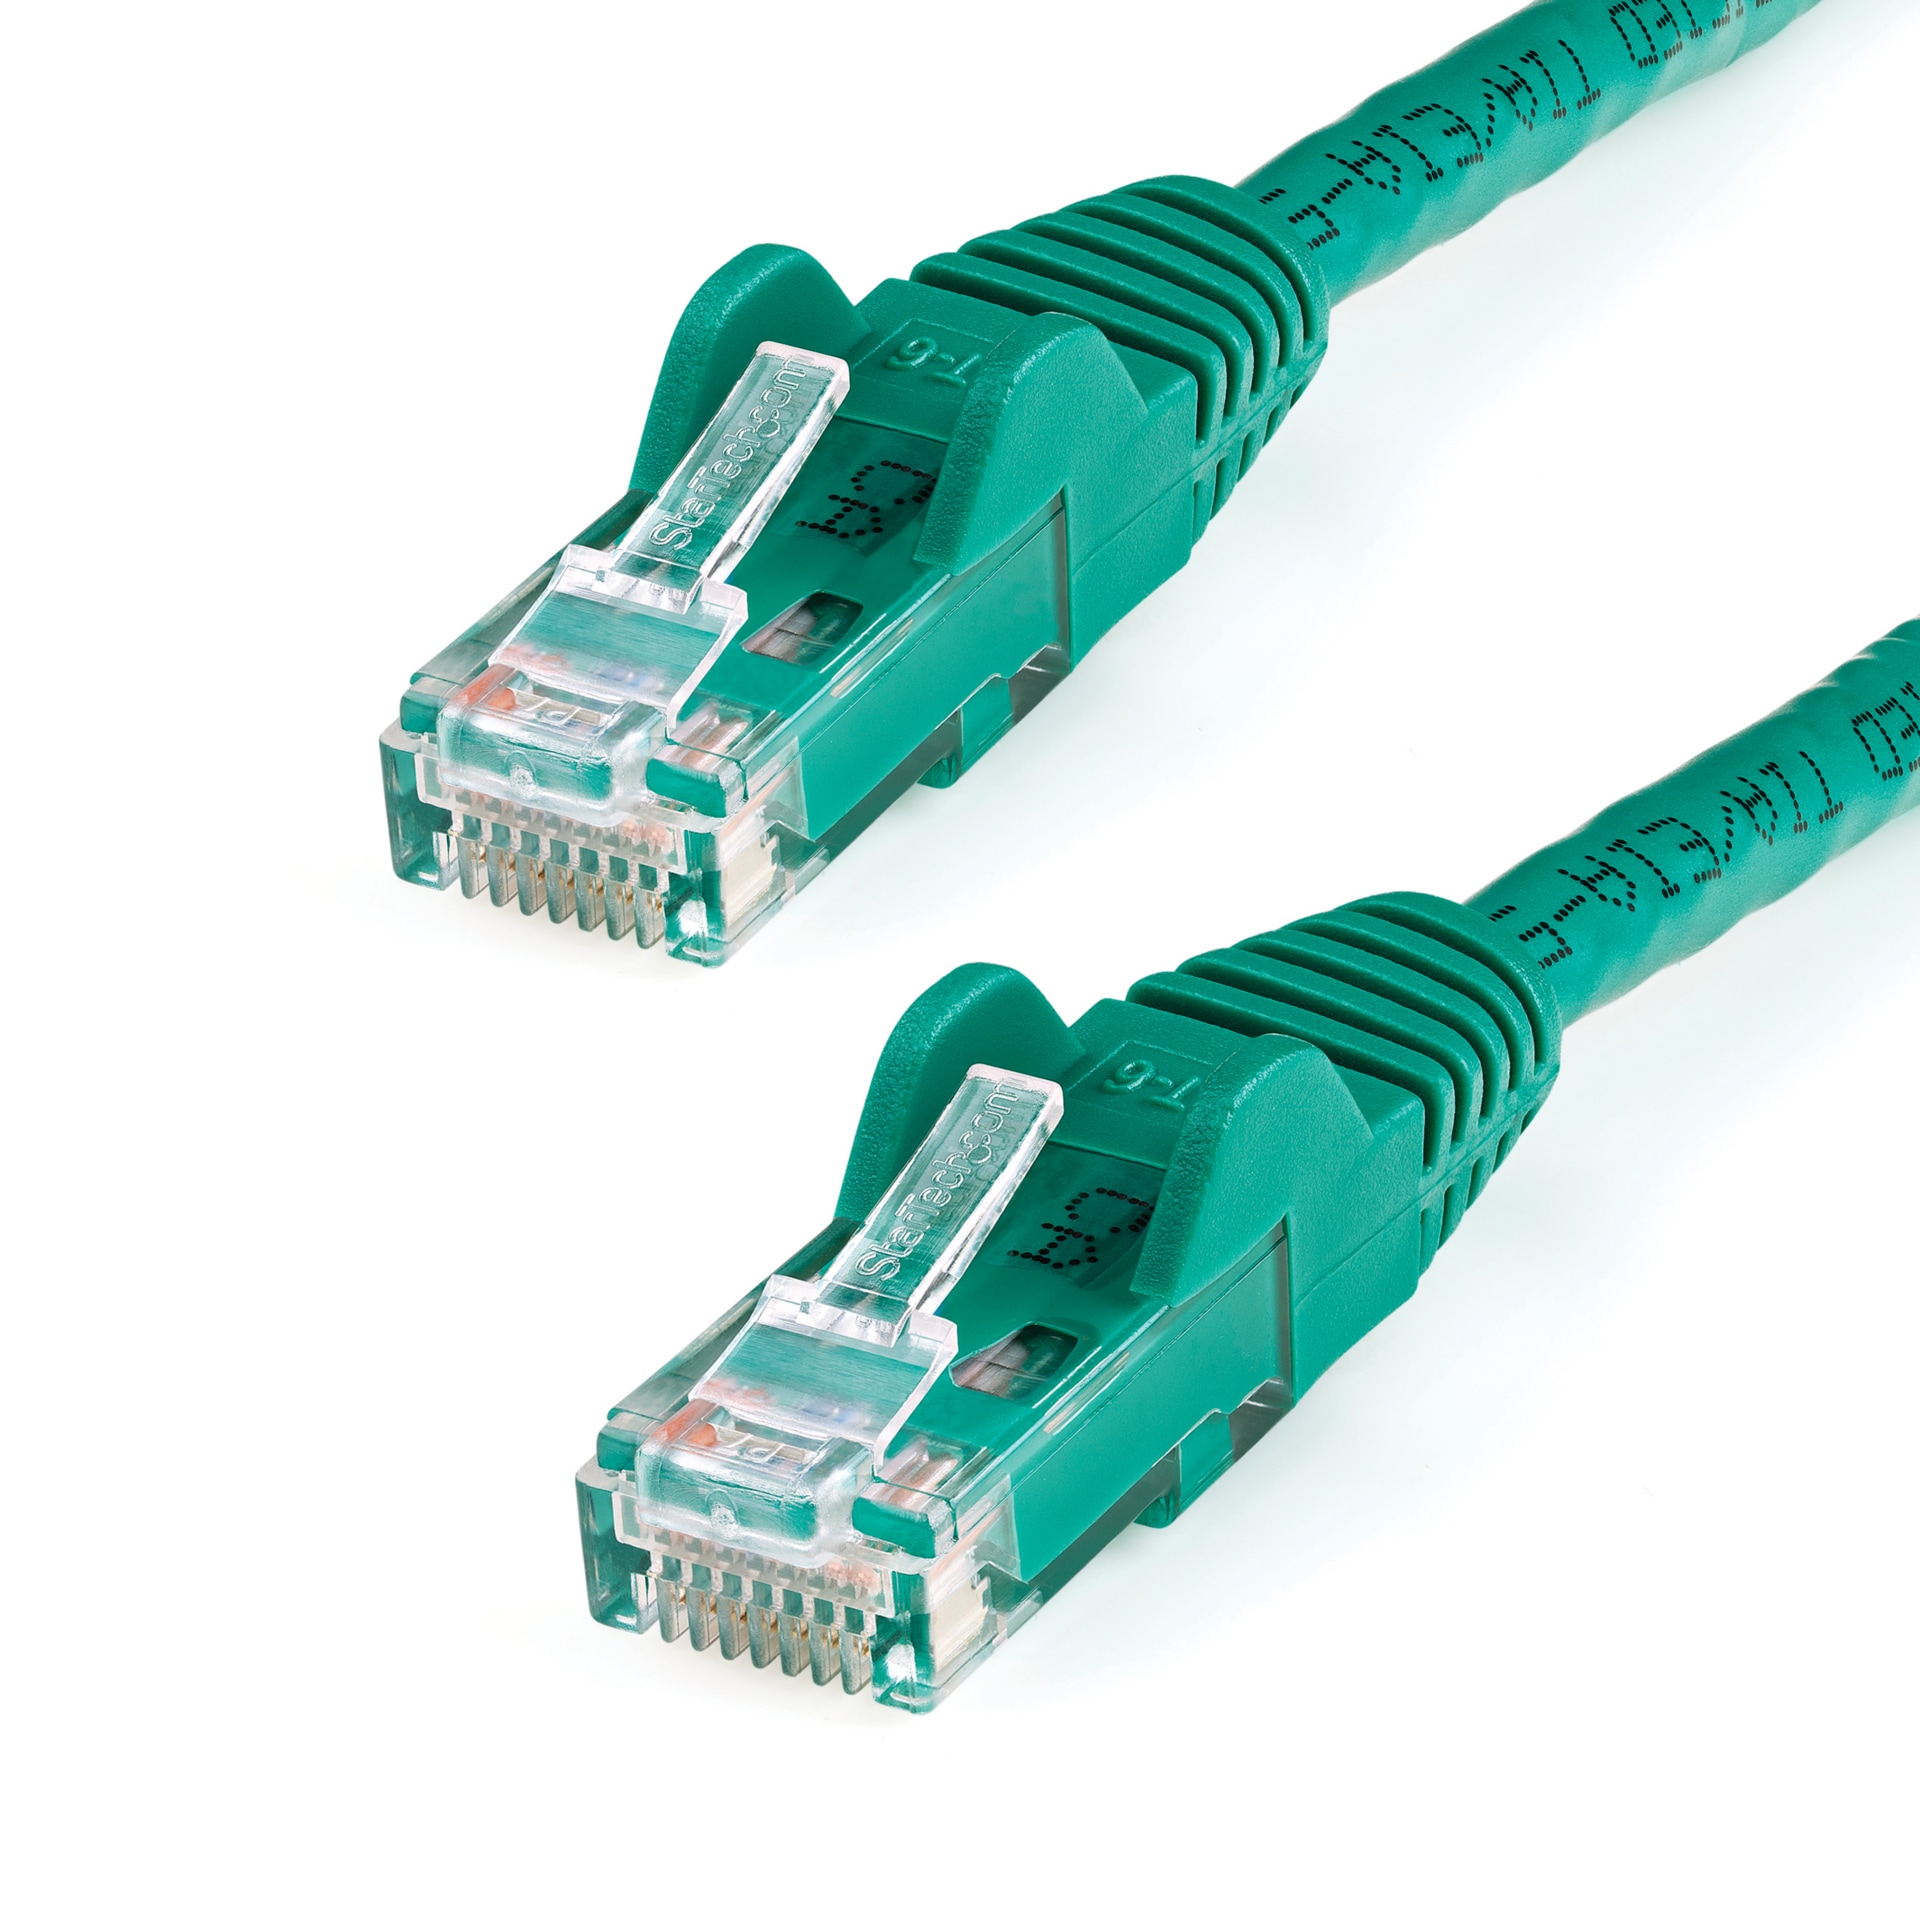 StarTech.com CAT6 Ethernet Cable 15' Green 650MHz PoE Snagless Patch Cord